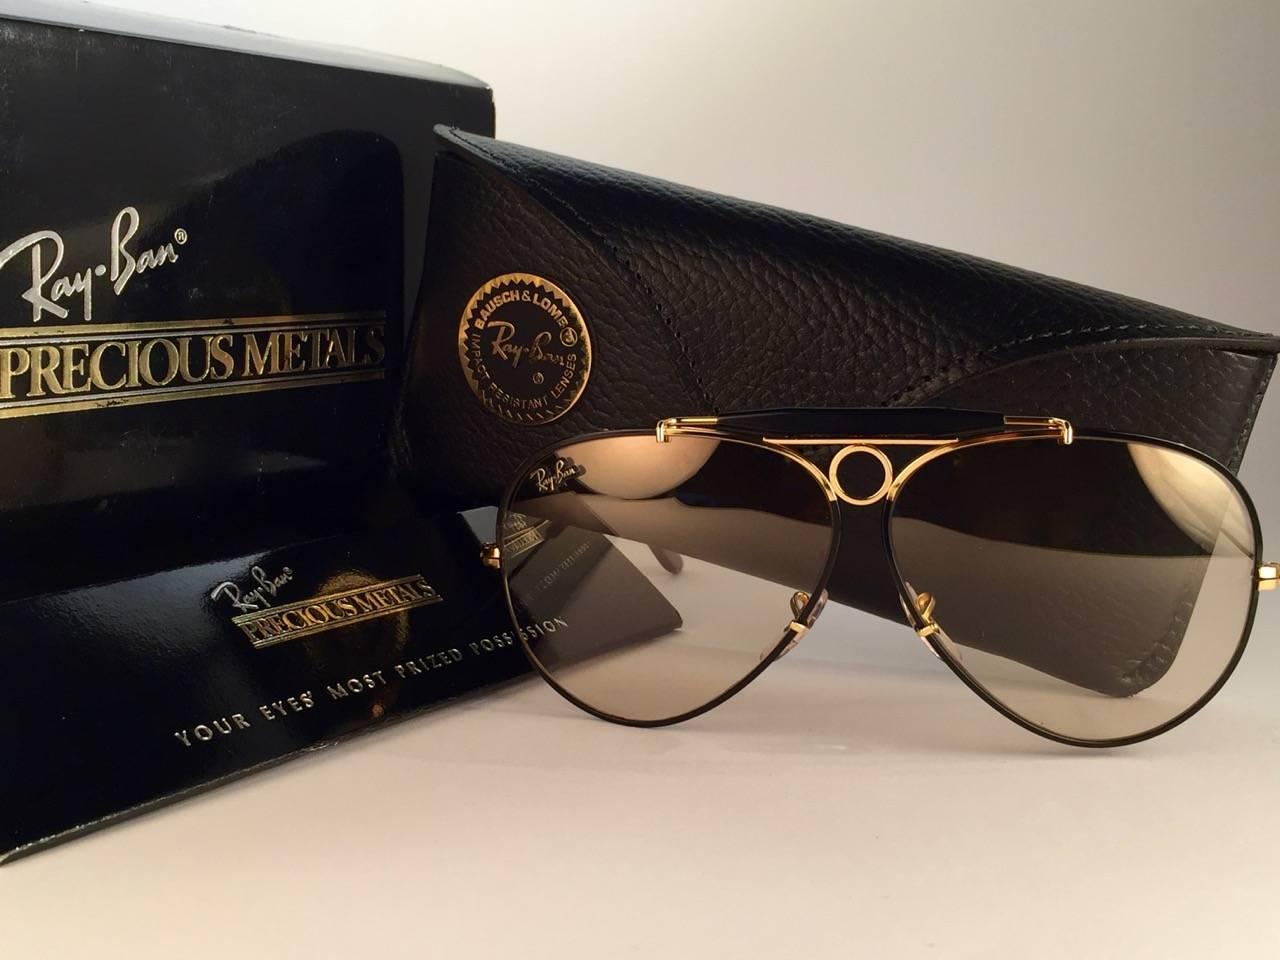 New Collectors Item Precious Metals Shooter in 62mm with original case. 
Full set. Frame is 24 k gold heavy plated combined with black enamel. 
The lenses are amazing brown changeable with a gradient and slight mirror. 
Ray Ban logo is on top of the